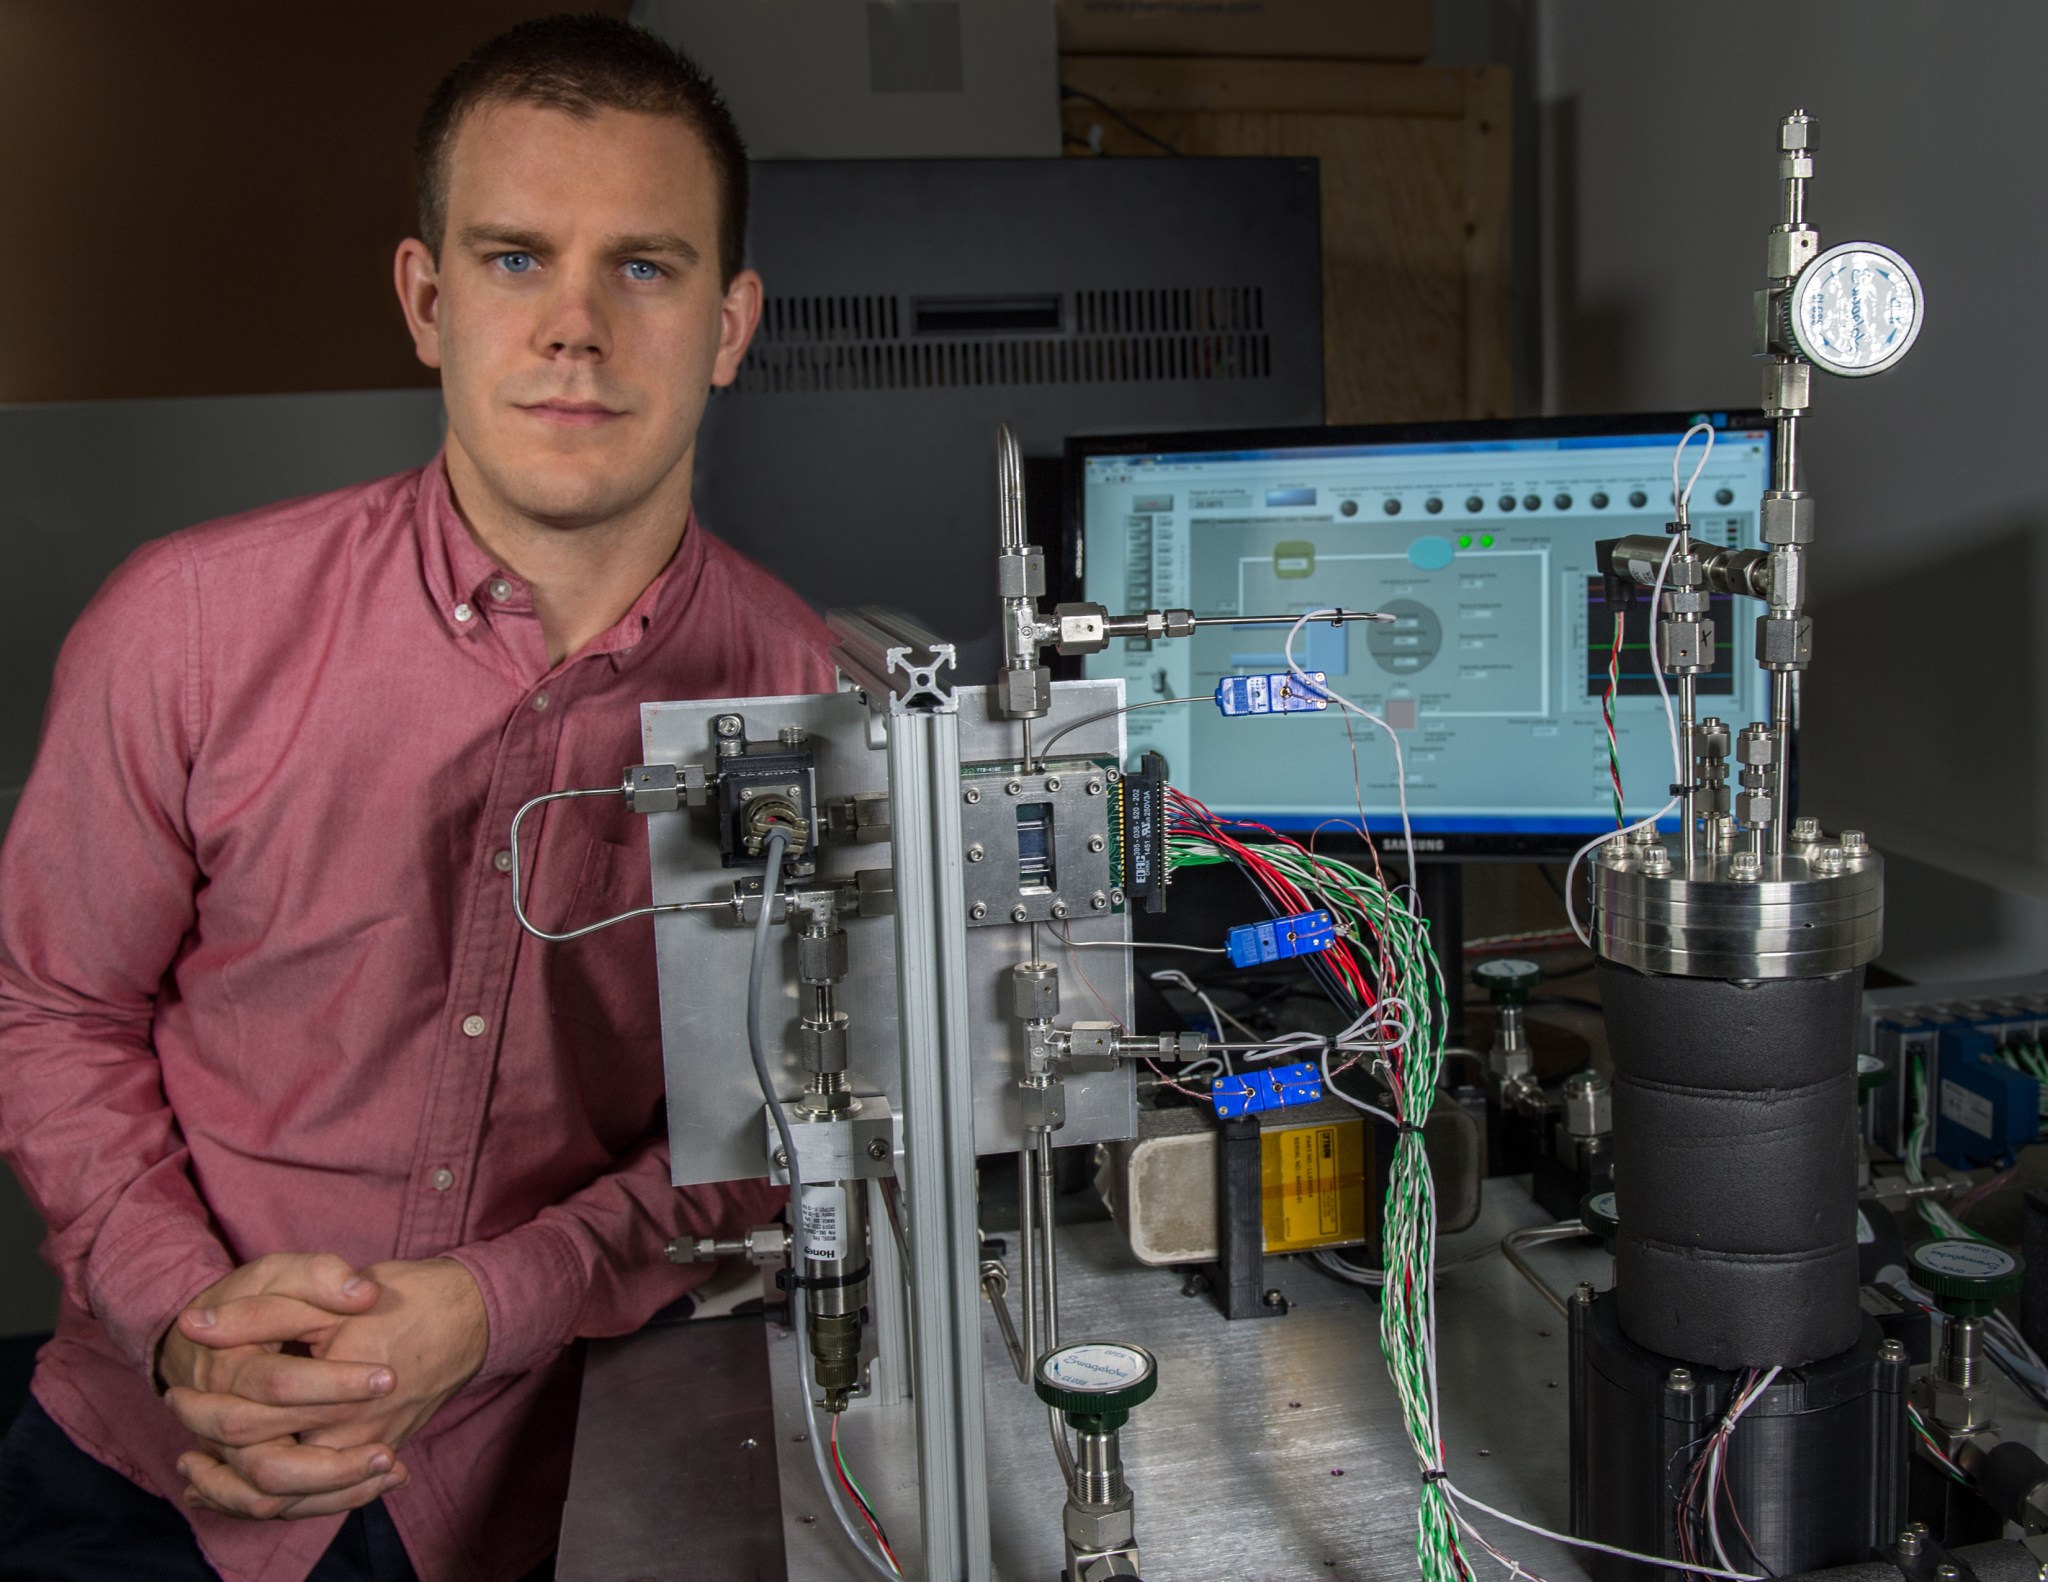 Technologist Franklin Robinson, young man with brown hair wearing a red button down shirt,  poses with a testbed he’s developed to experiment with a new cooling technique for emerging 3-D i